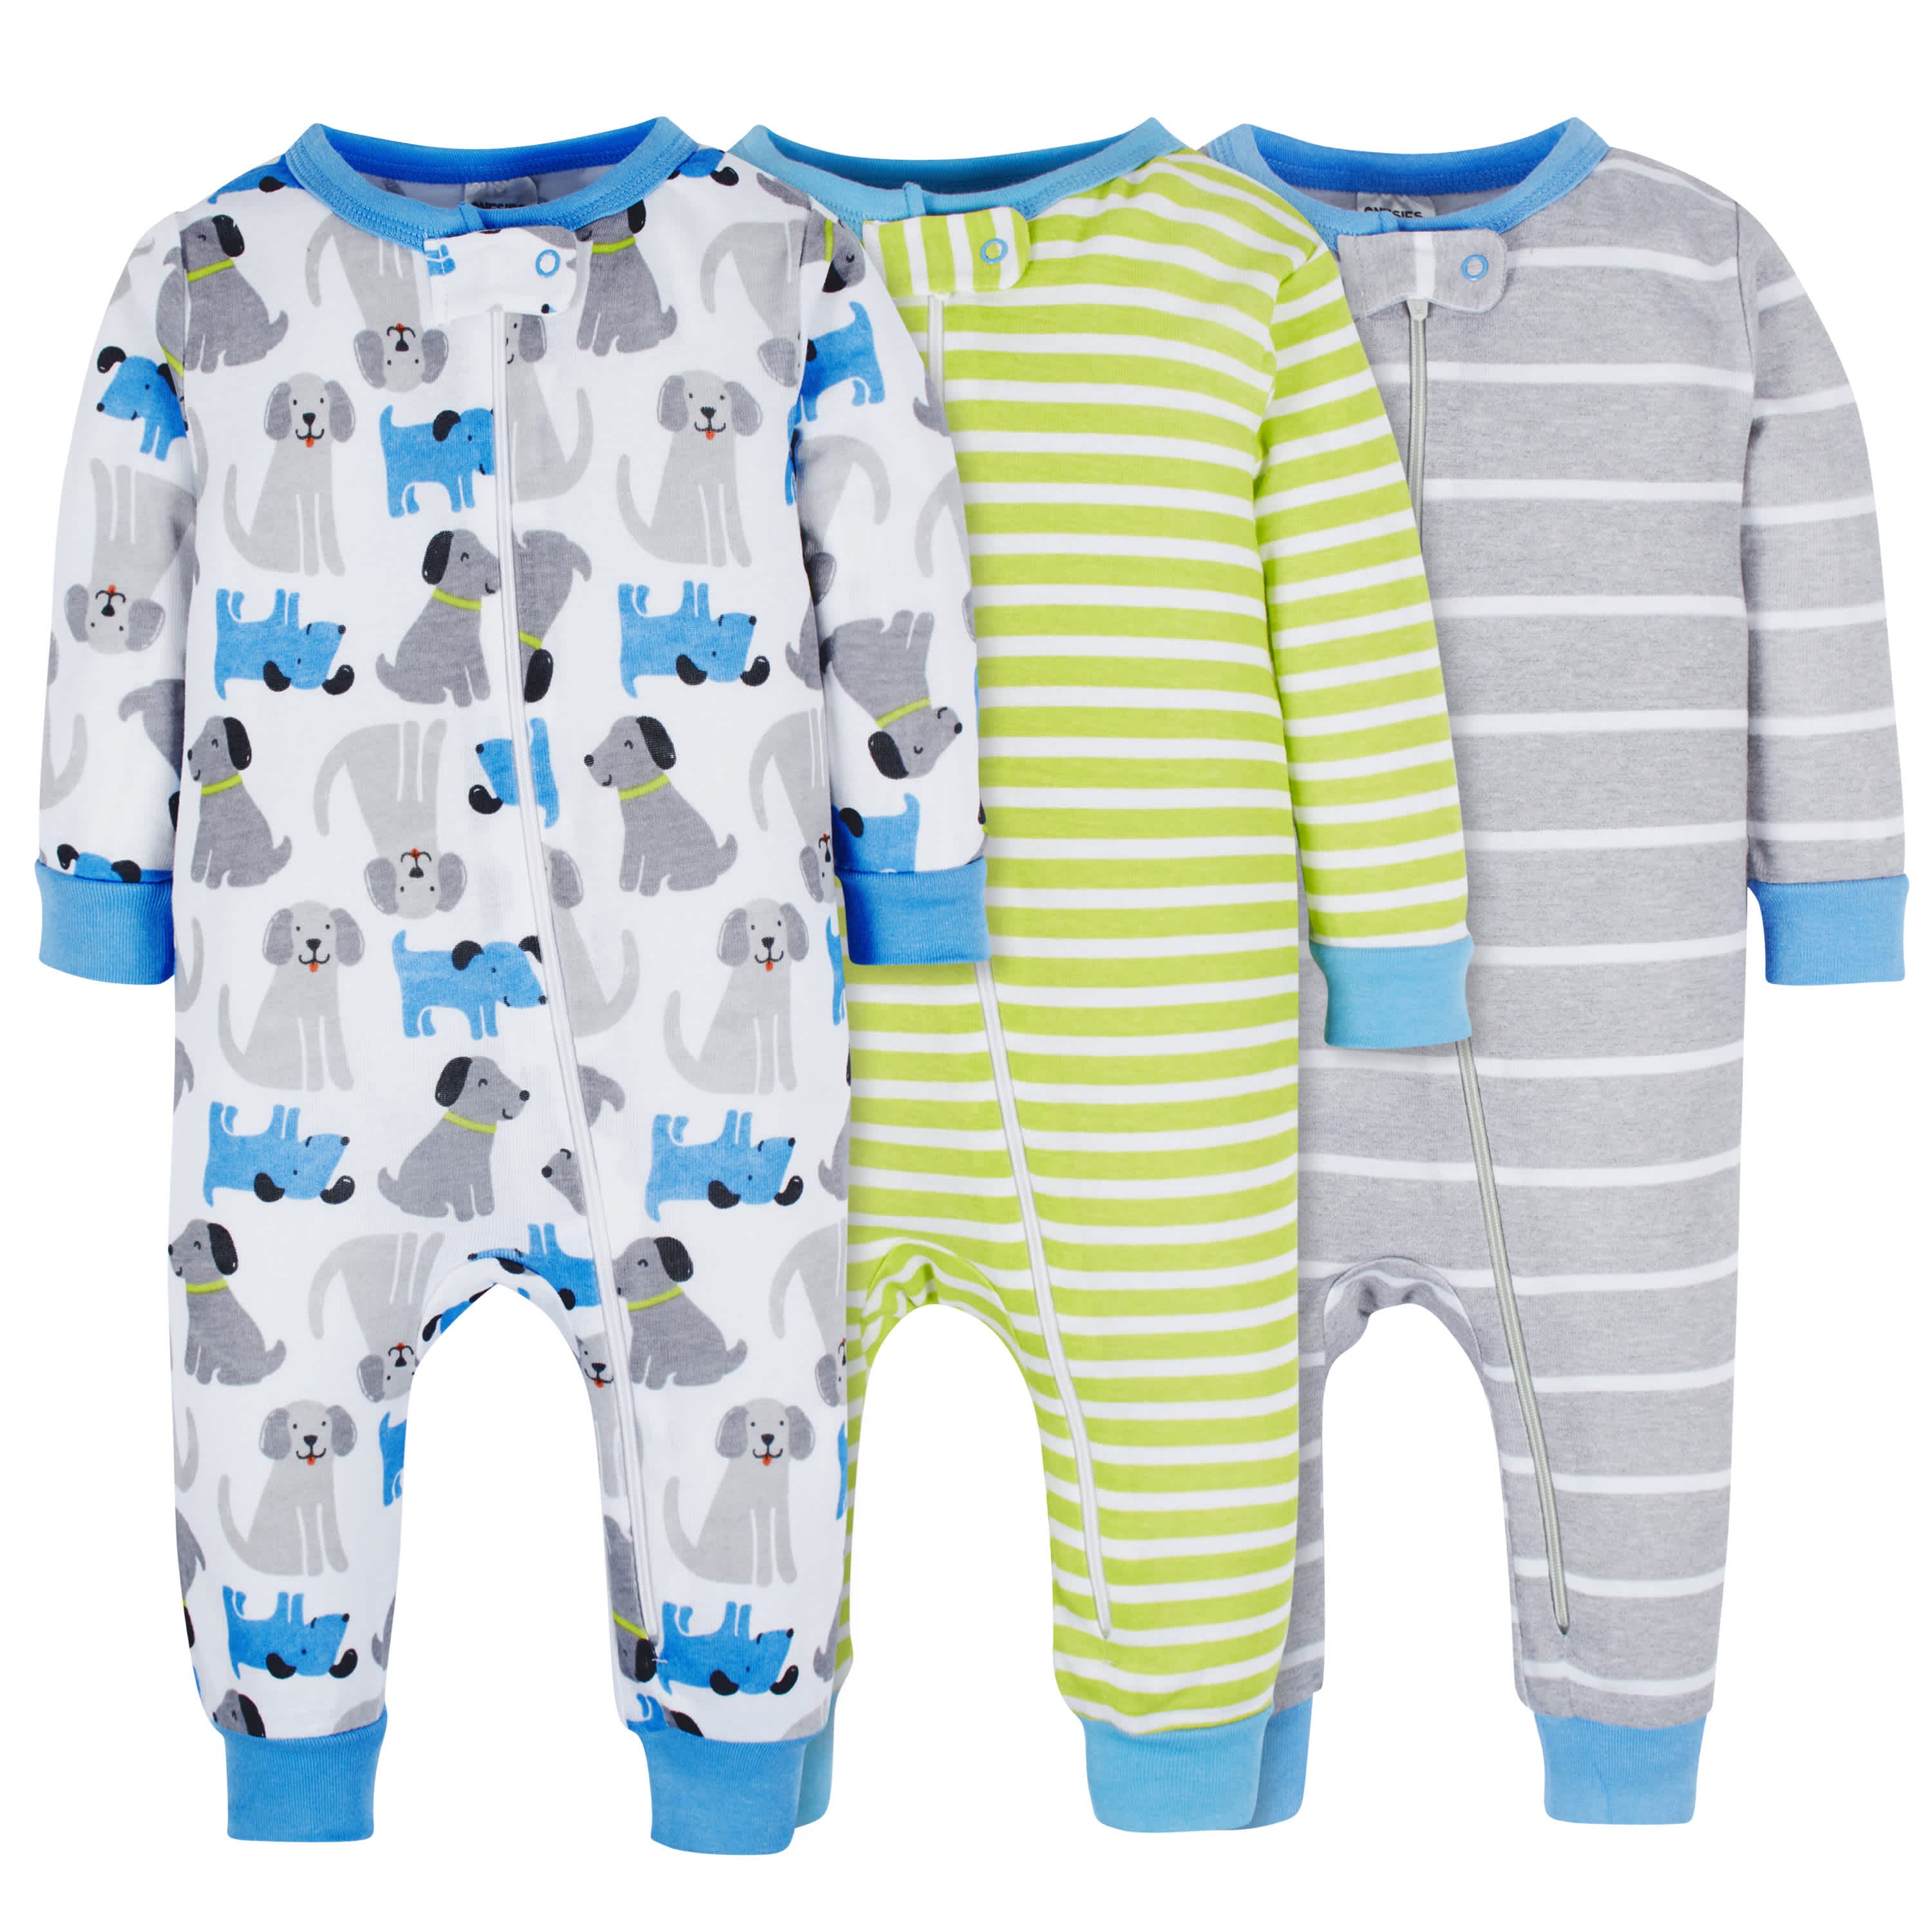 Onesies Brand Baby & Toddler Girl Snug Fit Footless Cotton Pajamas, 3-Pack  (0/3 Months - 5T)